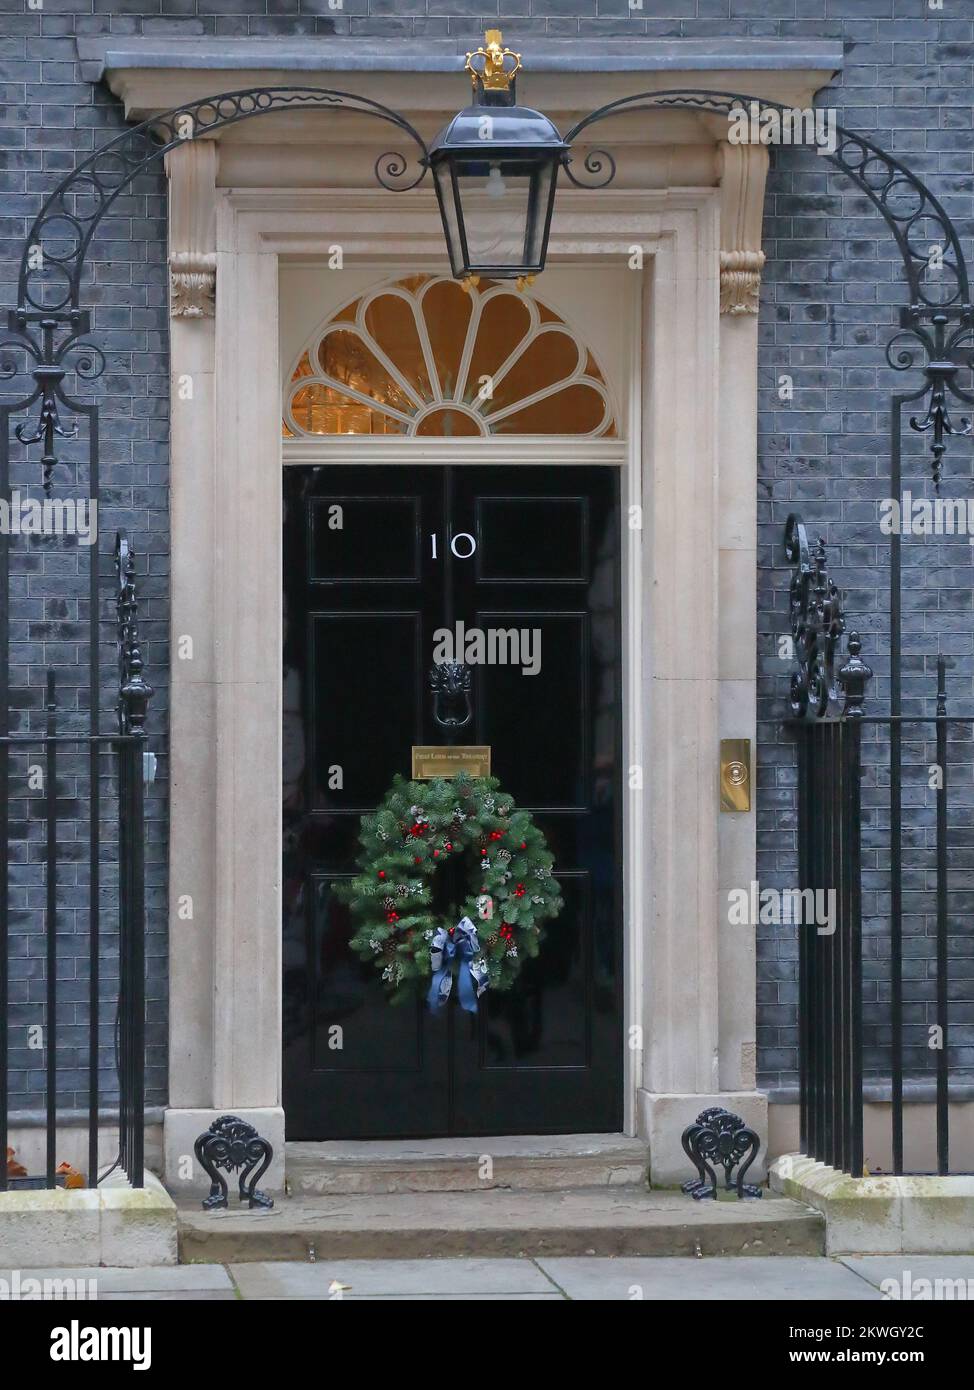 Downing Street, London, UK. 29th November 2022. The entrance door at No 10 Downing Street is decorated with a wreath in time for Christmas. Credit: Uwe Deffner/Alamy Live News Stock Photo